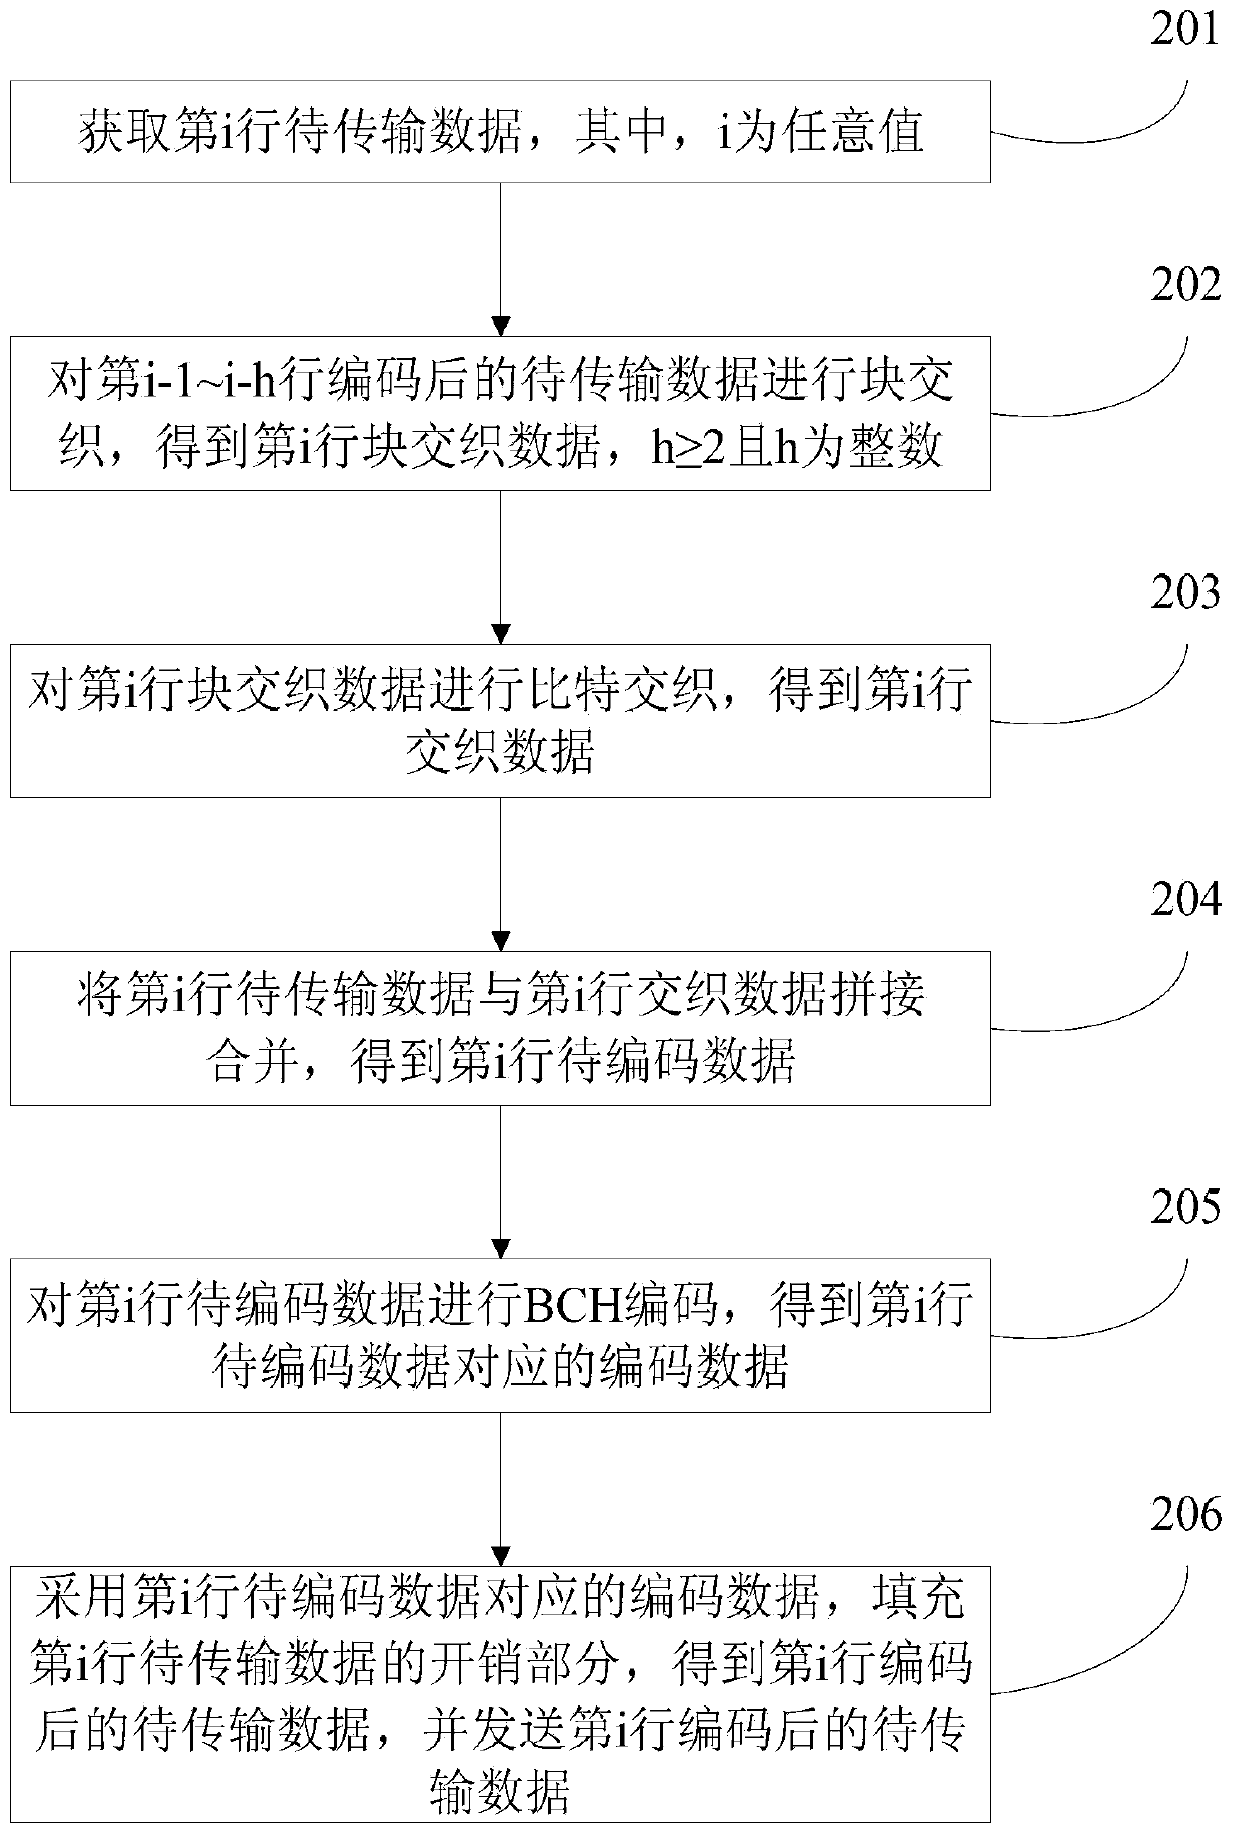 Method and device for forward error correction encoding, method and device for forward error correction decoding, and communication device and system